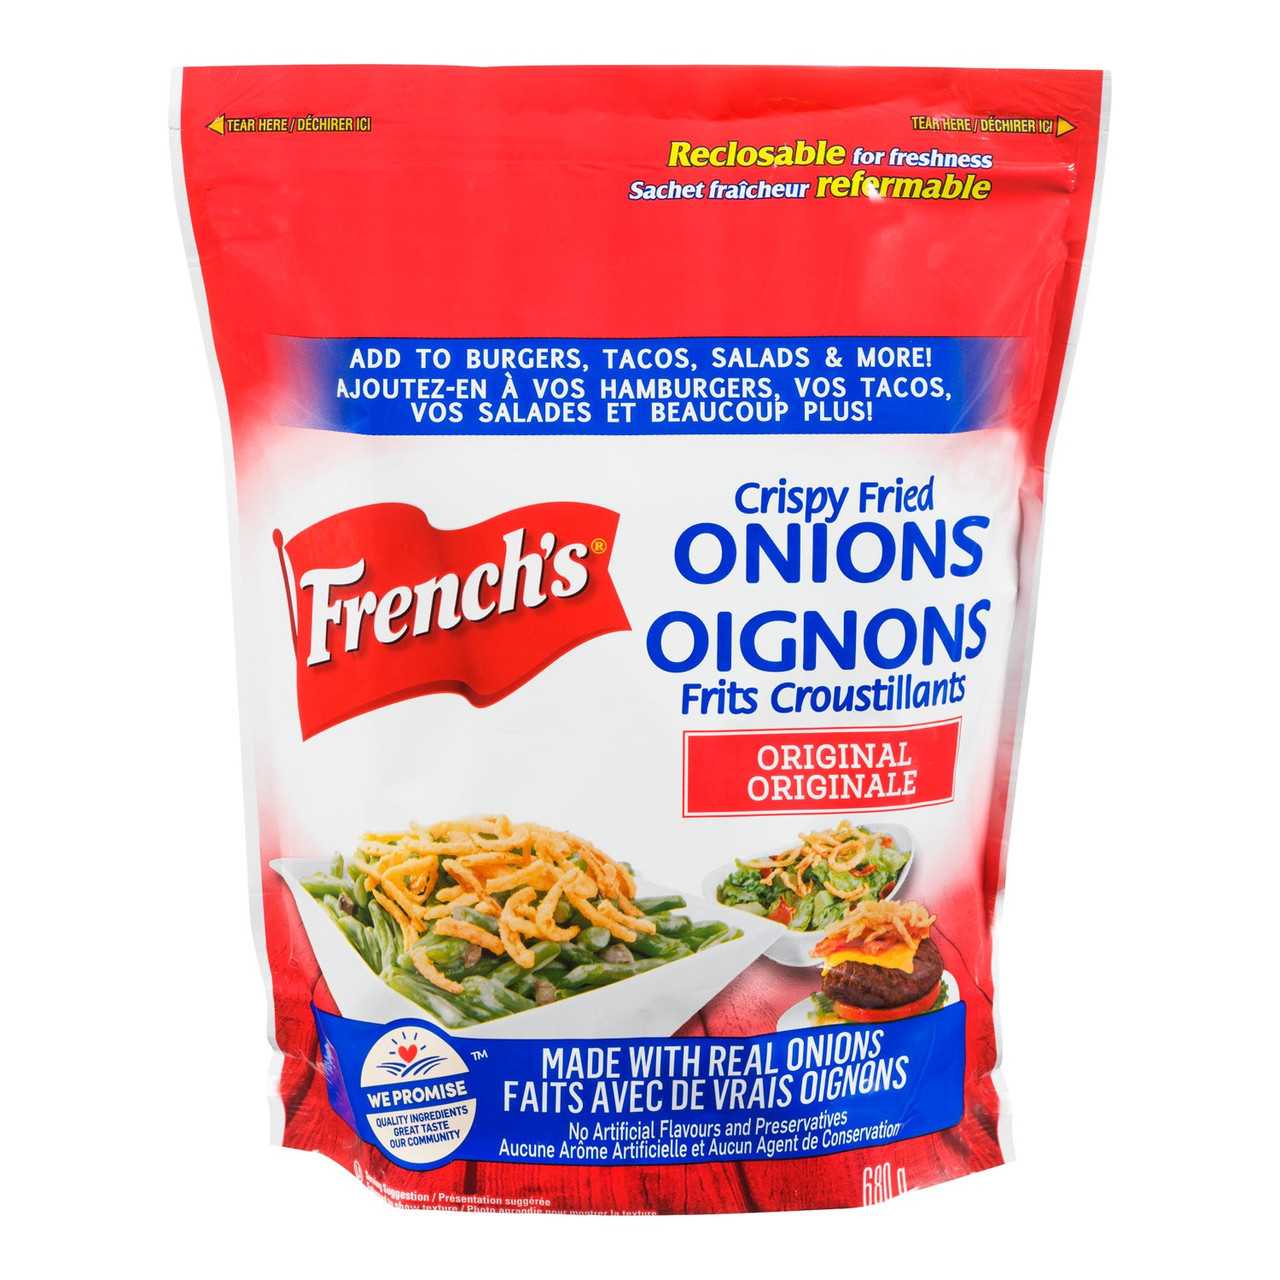 French's Original Crispy Fried Onions, 6 oz Salad Toppings 